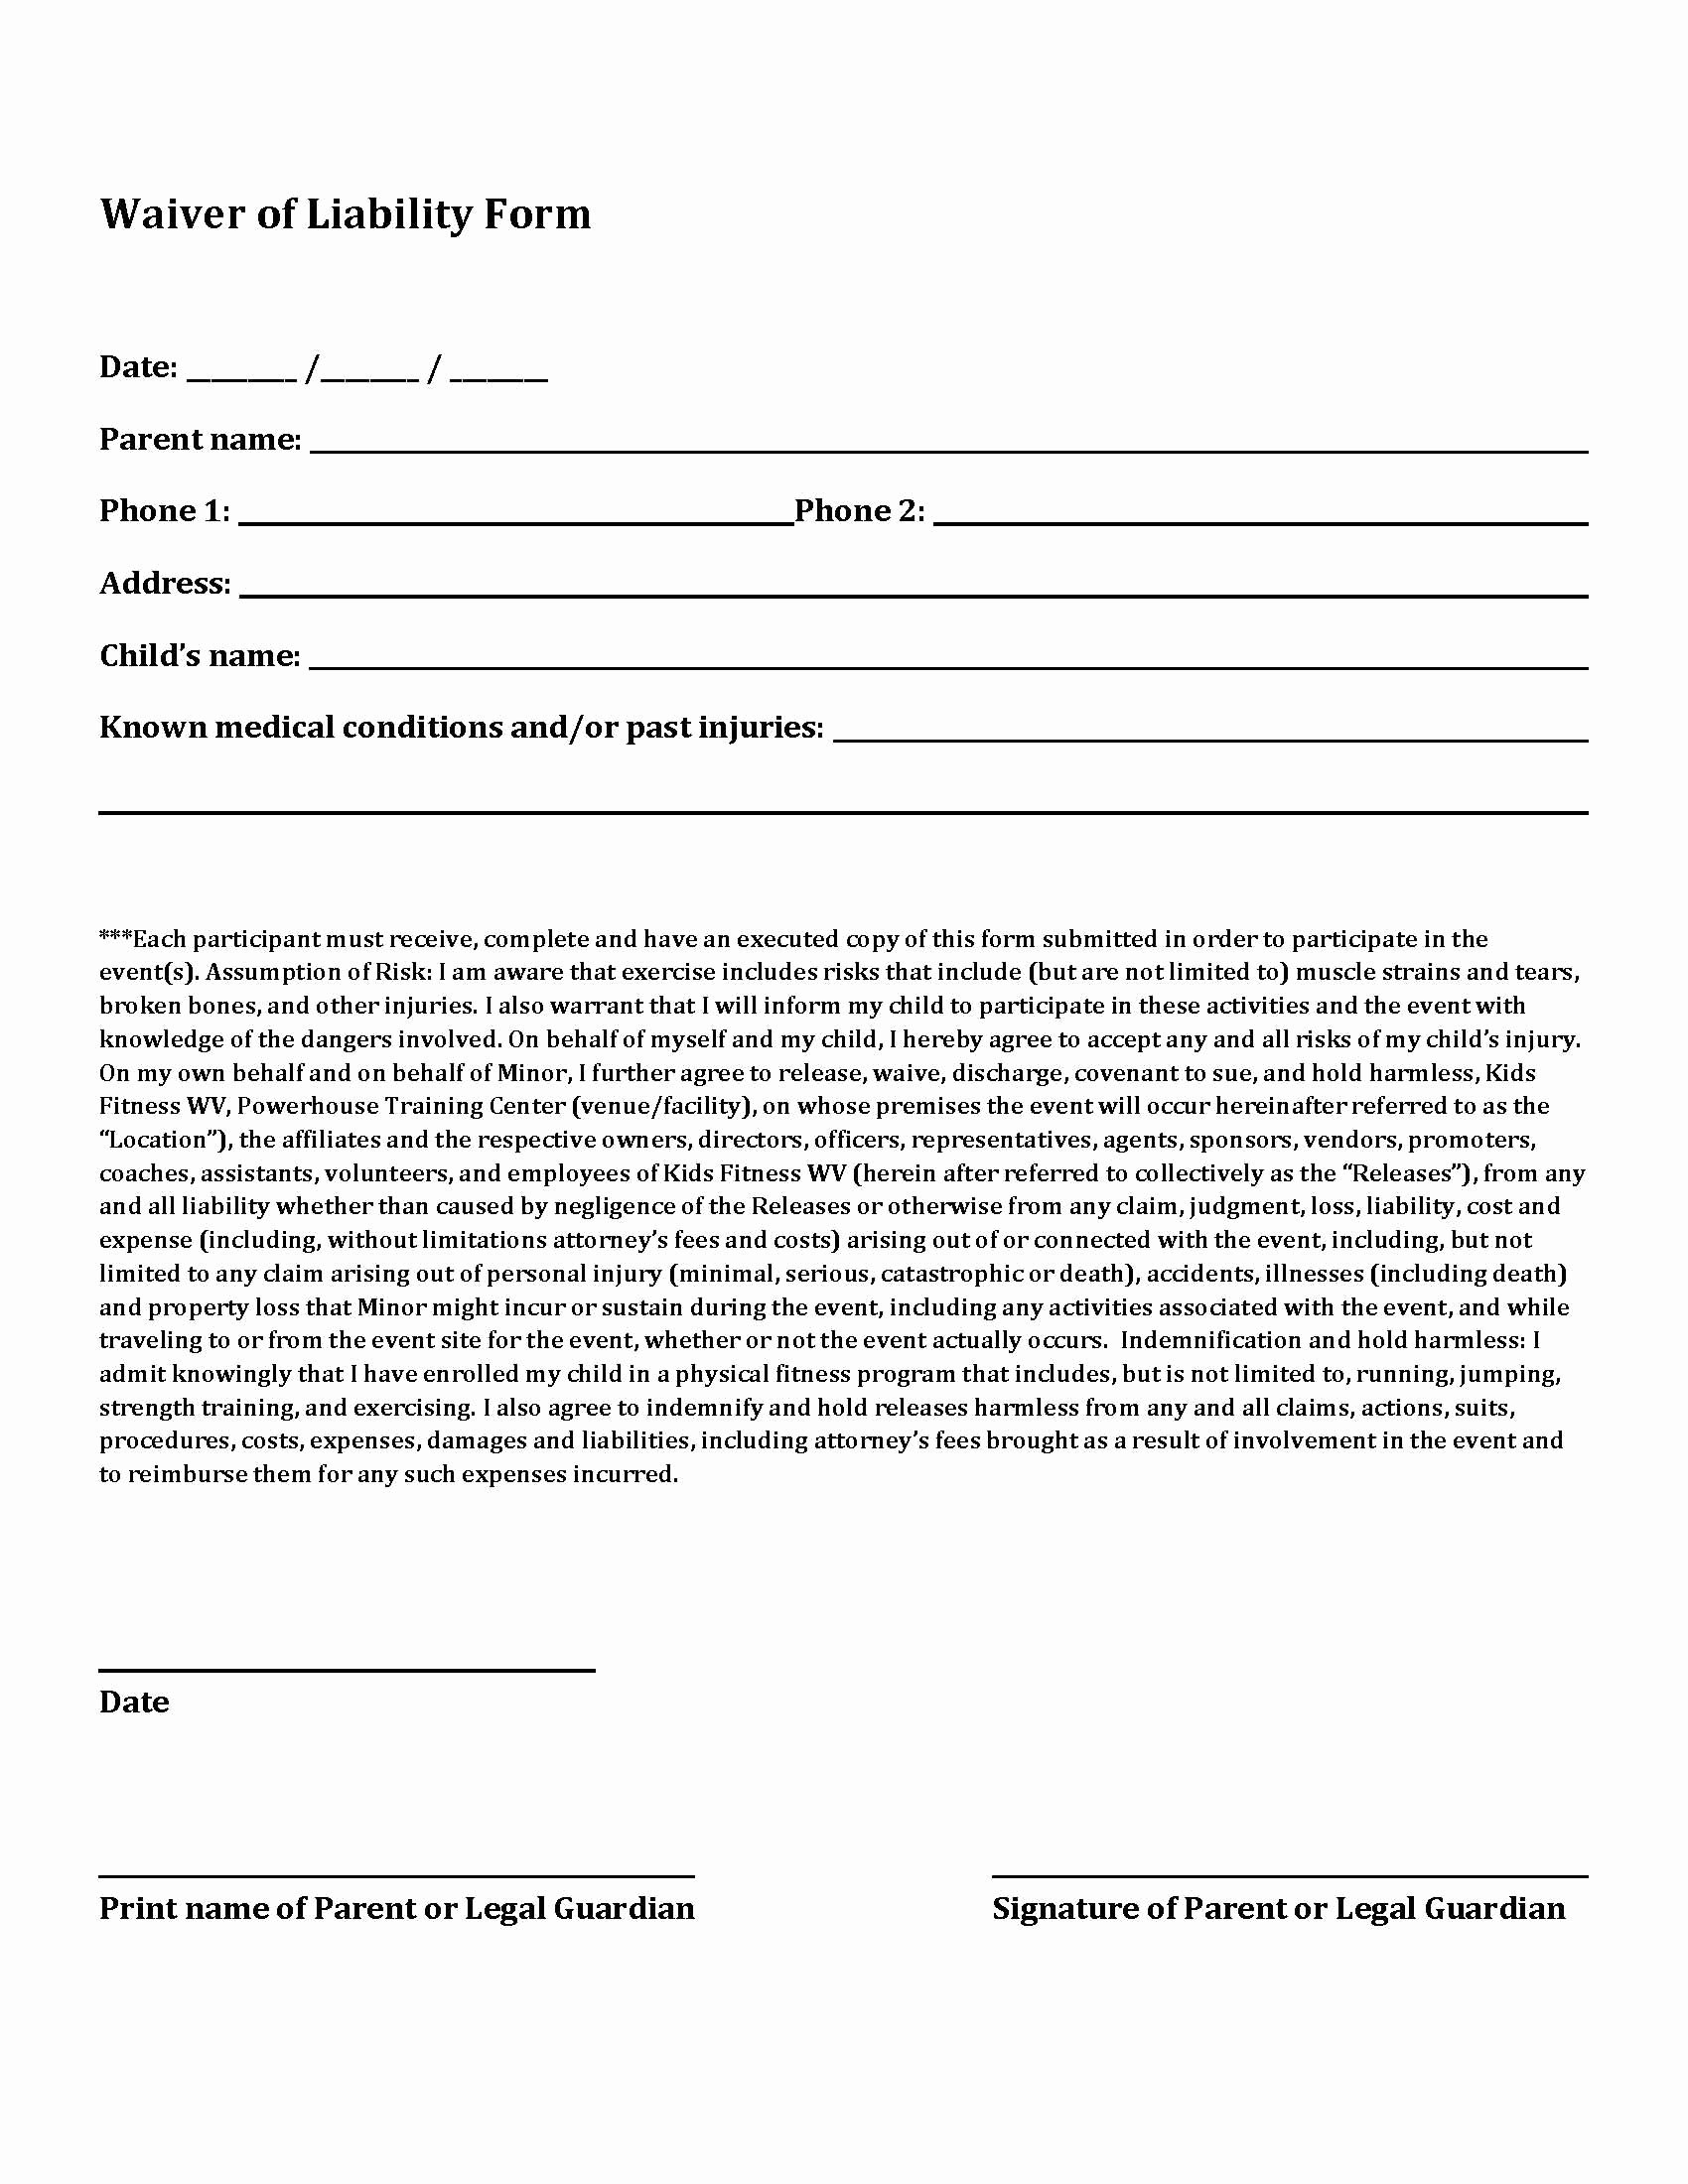 Cheerleading Registration form Template Lovely Team Extreme Waiver form Announcements